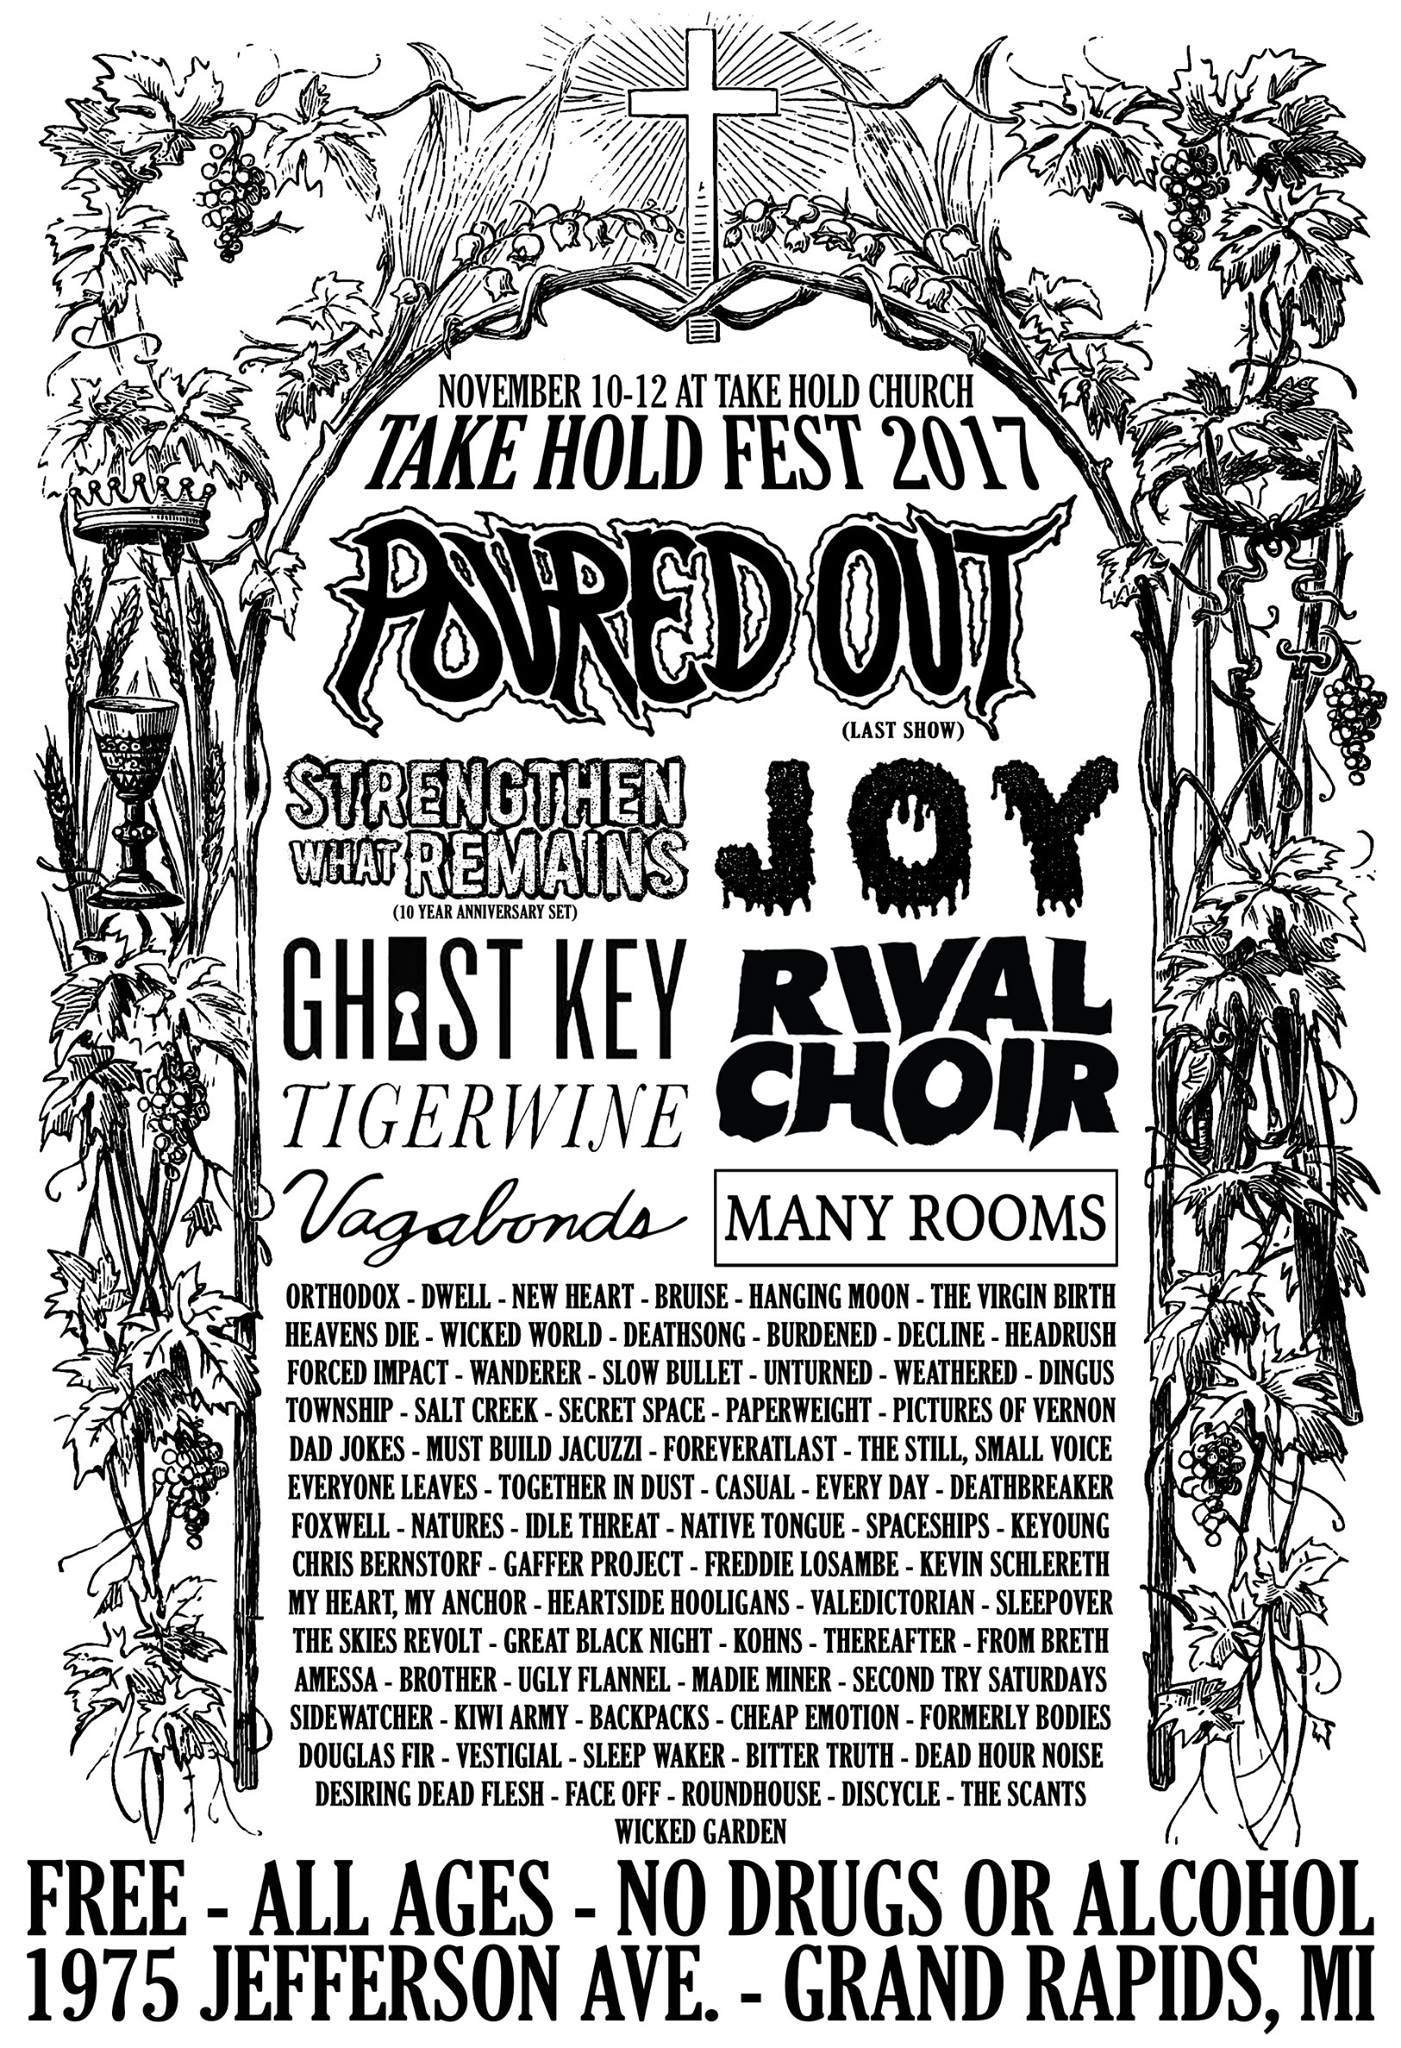 Festival Announcement: Take Hold